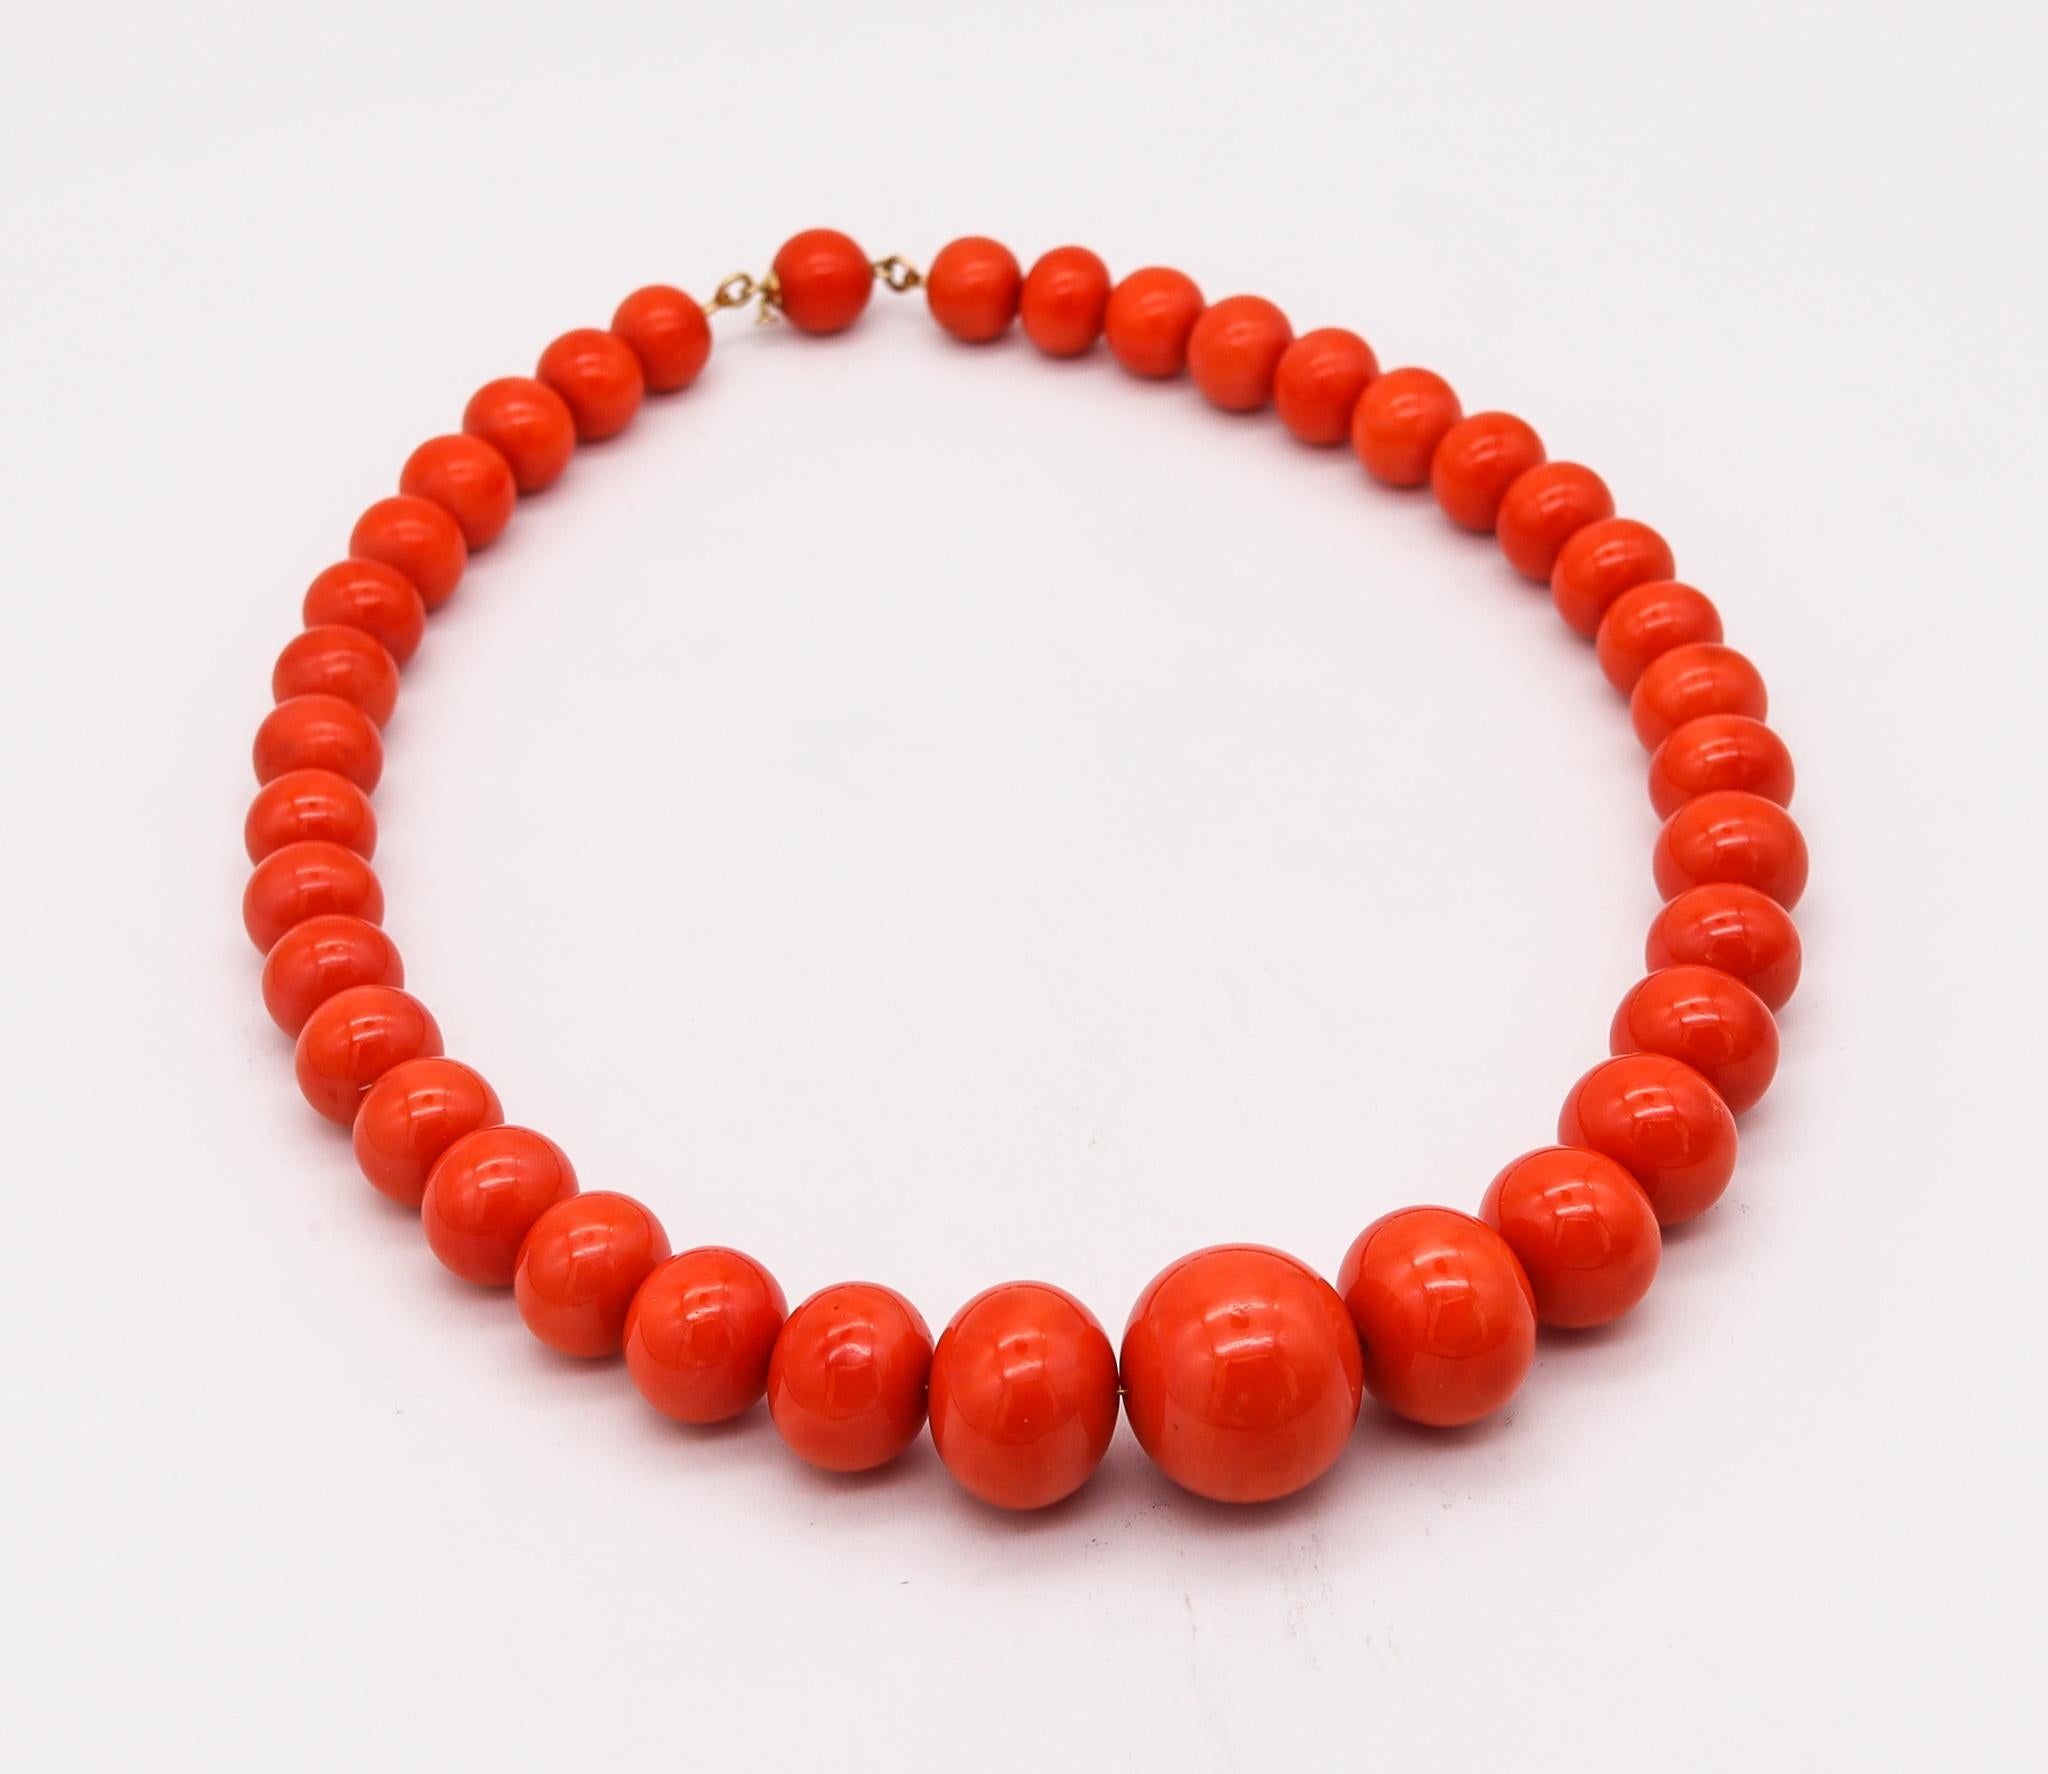 Modernist Mid Century 1950 Graduated Coral Large Beads Necklace Mount In 18Kt Yellow Gold